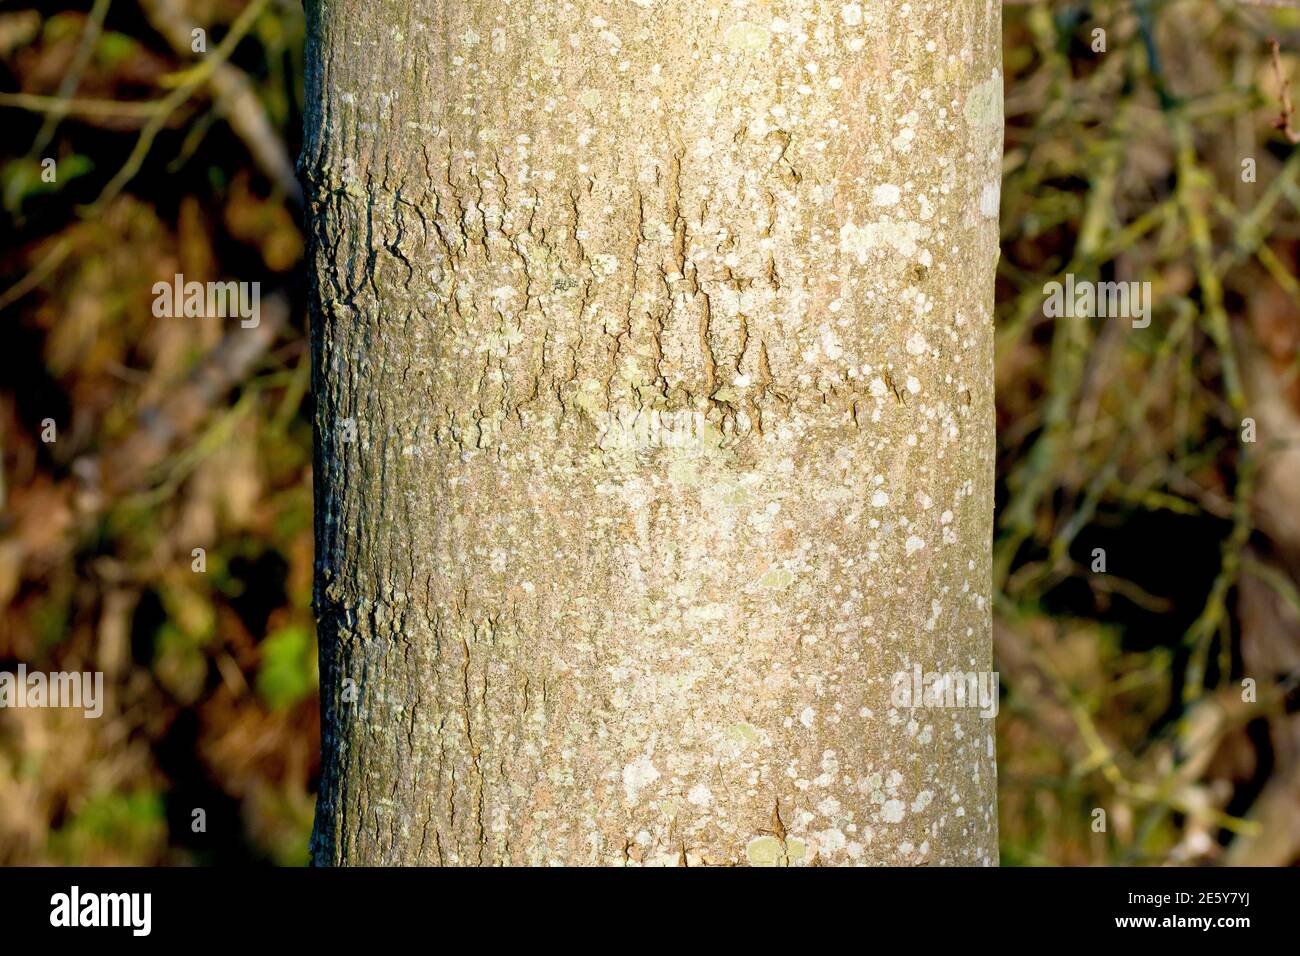 Ash (fraxinus excelsior), close up of the as yet still smooth texture of the bark on a young tree. Stock Photo